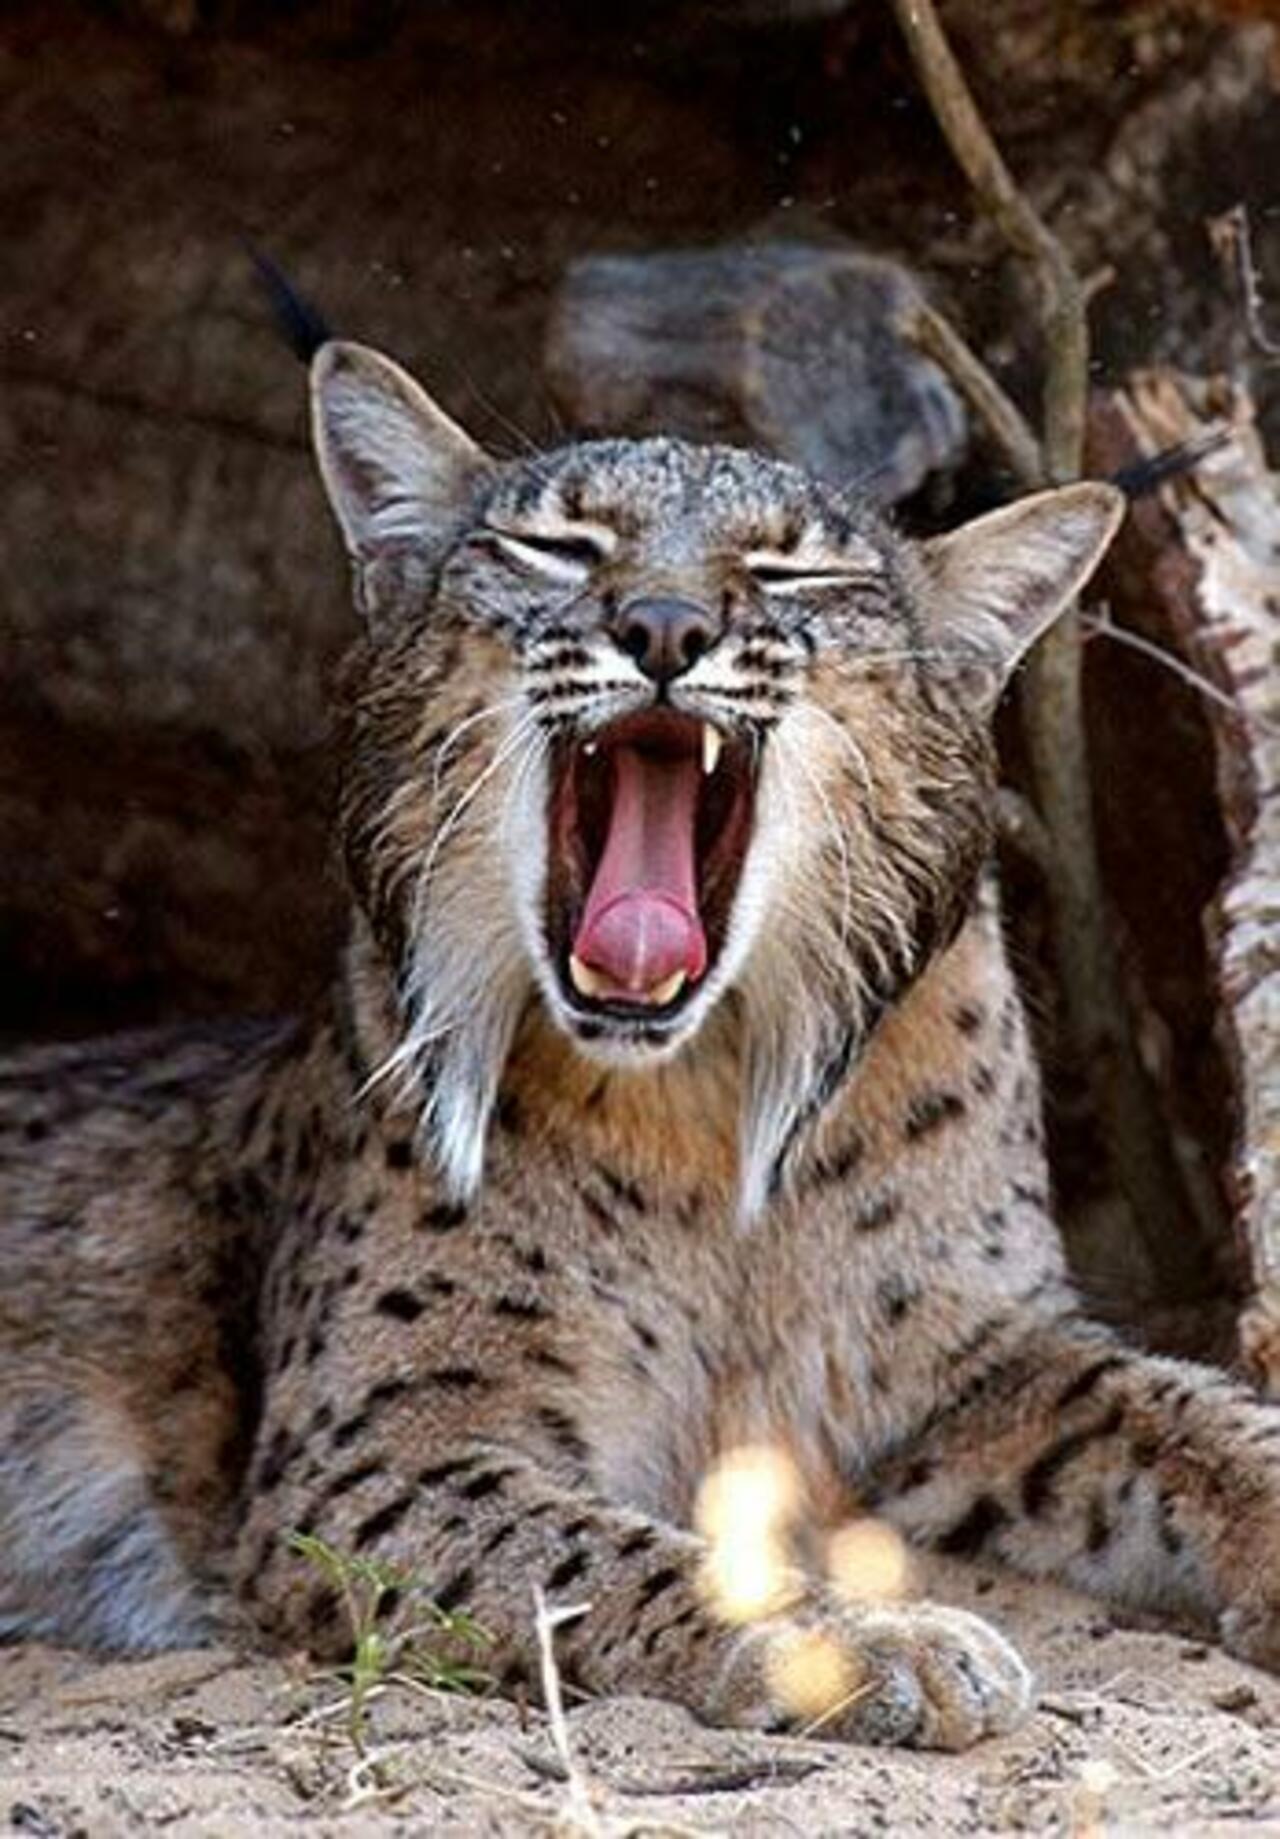 Bringing Back the Iberian Lynx - OneEurope http://one-europe.info/bringing-back-the-iberian-lynx#.VRJtz_frZLE.twitter #spain #portugal #environment #nature http://t.co/q8V6Dhyqj7